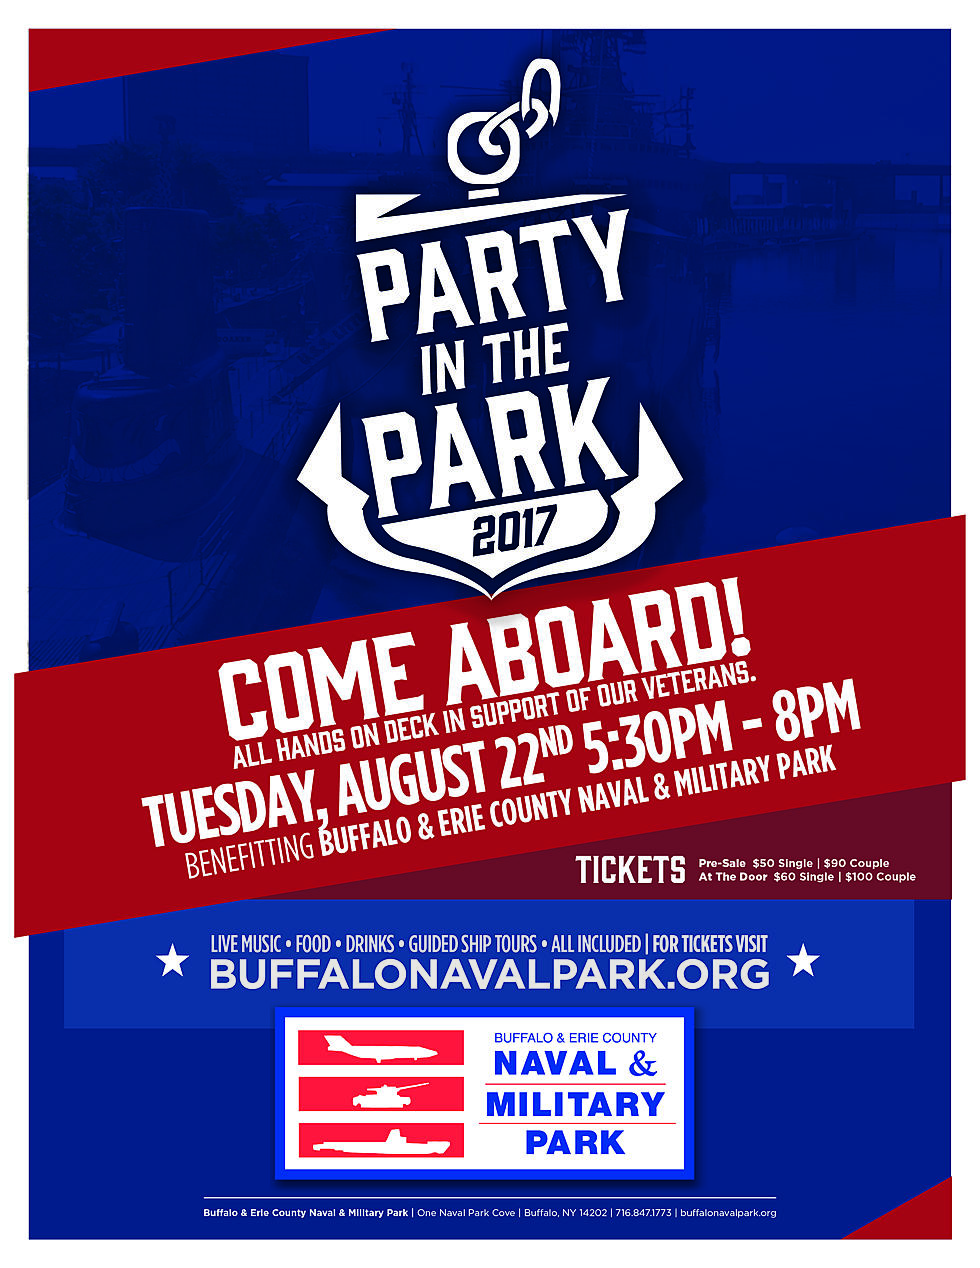 Community: Buffalo Naval Park Hosts “Party in the Park” on August 22